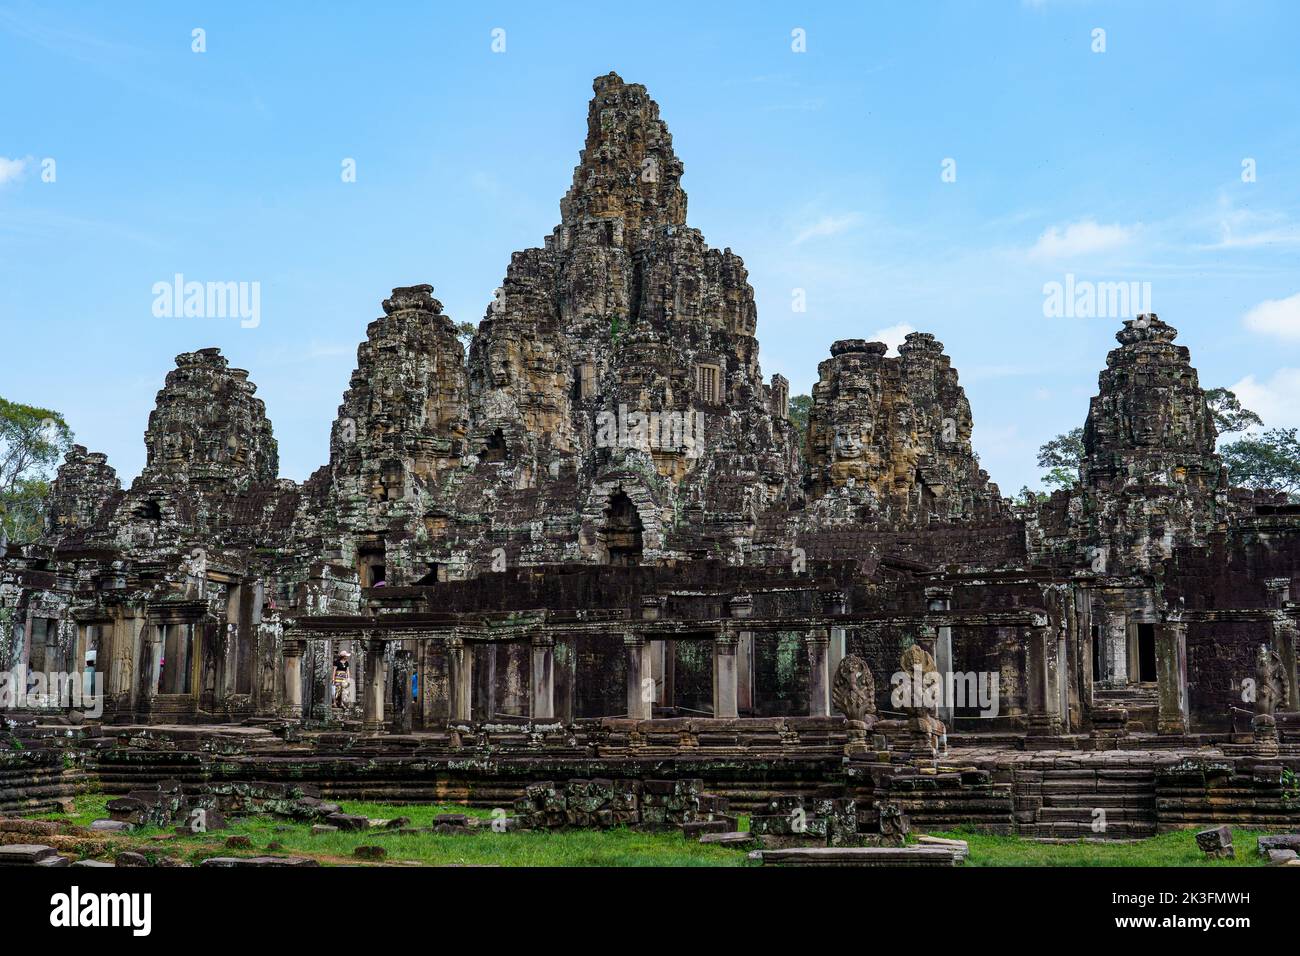 Cambodia. Siem Reap. The archaeological park of Angkor. The Bayon Temple 12th century Hindu temple Stock Photo